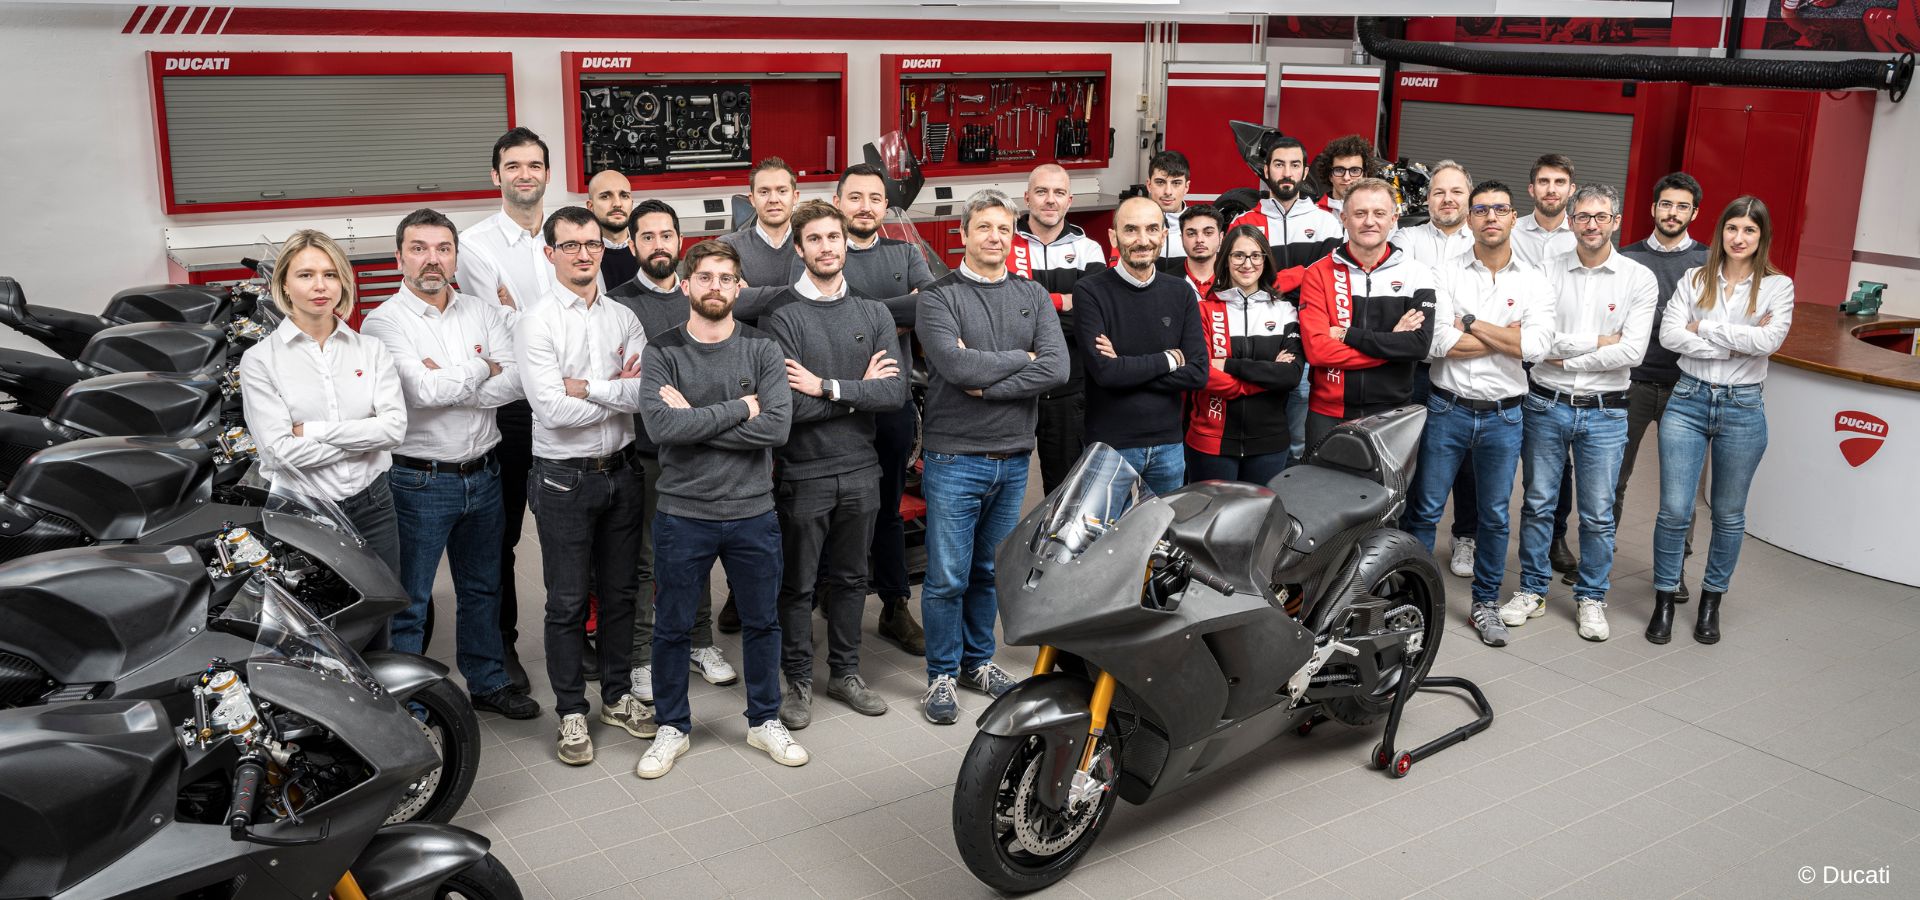 The MotoE bikes of Ducati are in production